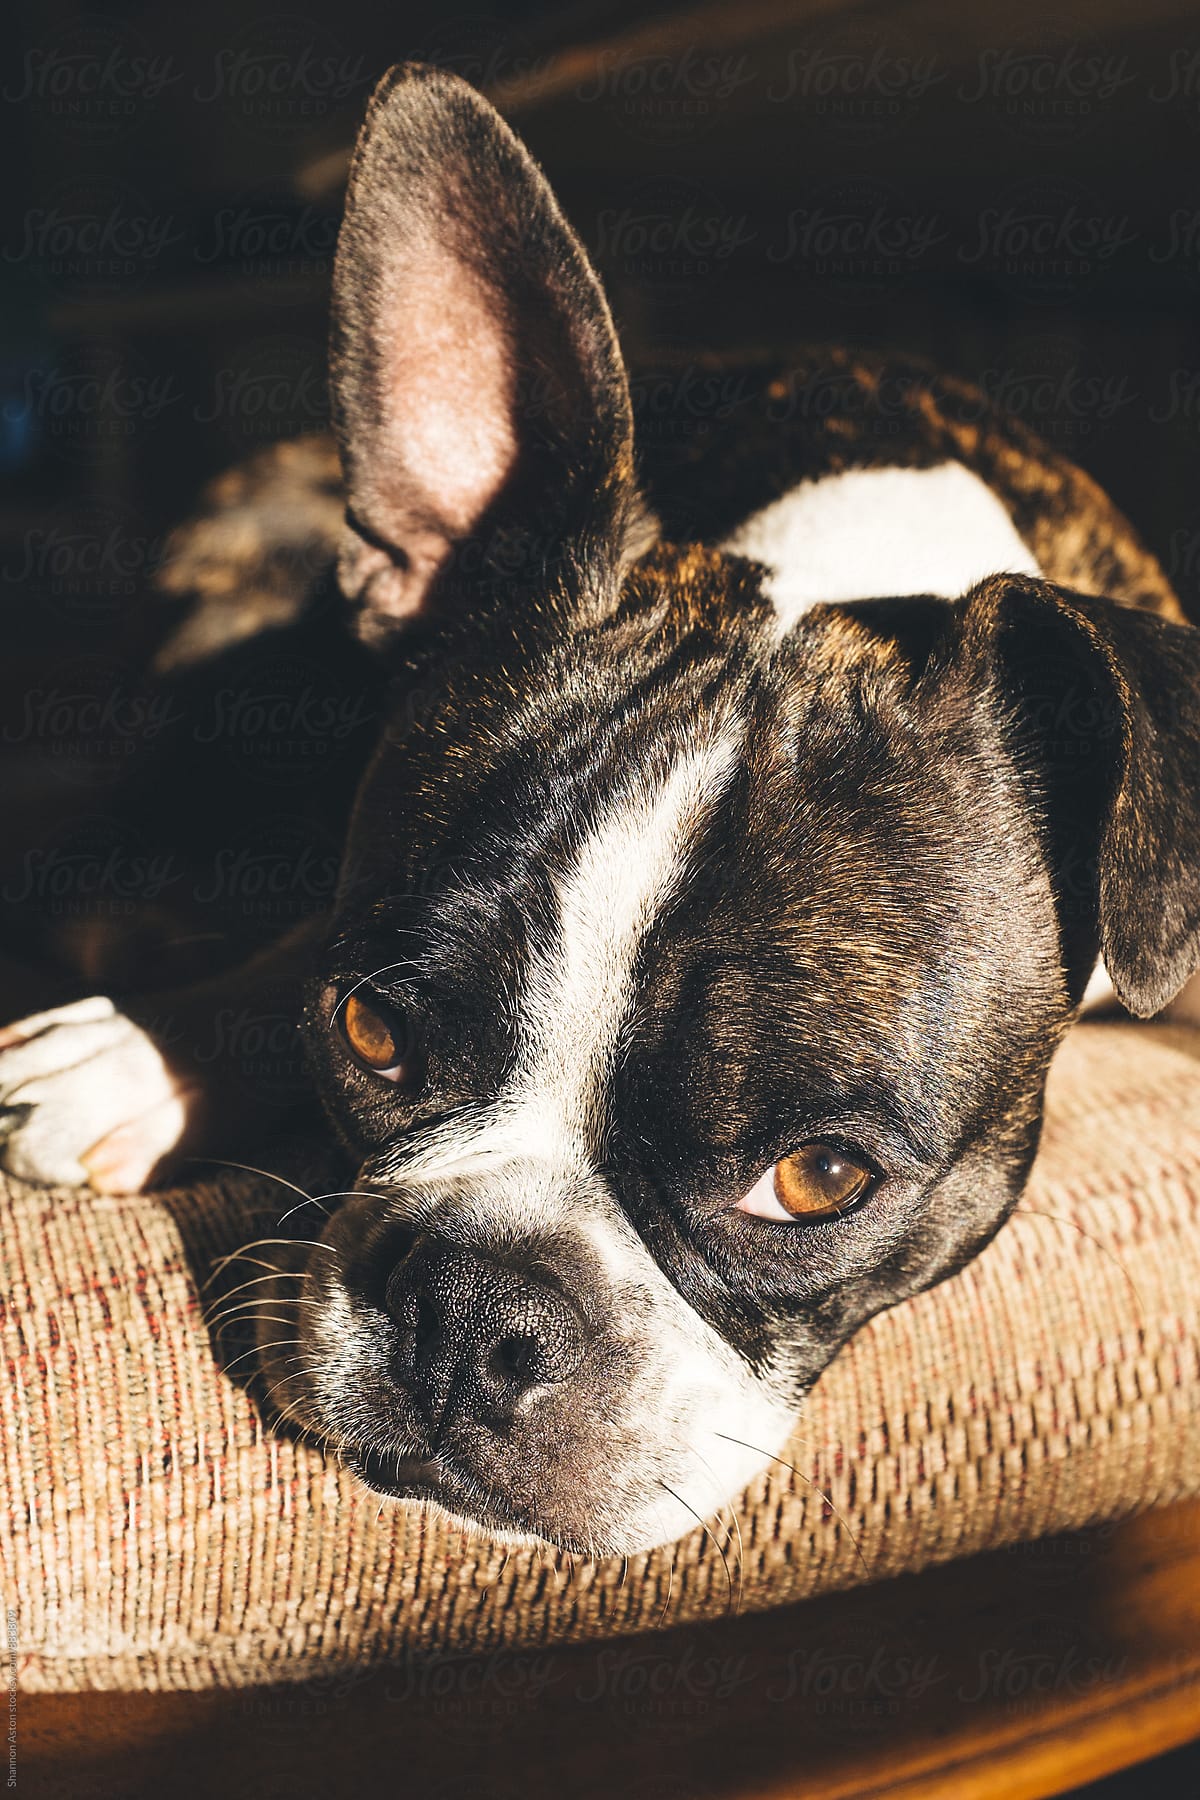 Bruce the Boston Terrier gets some California rays.